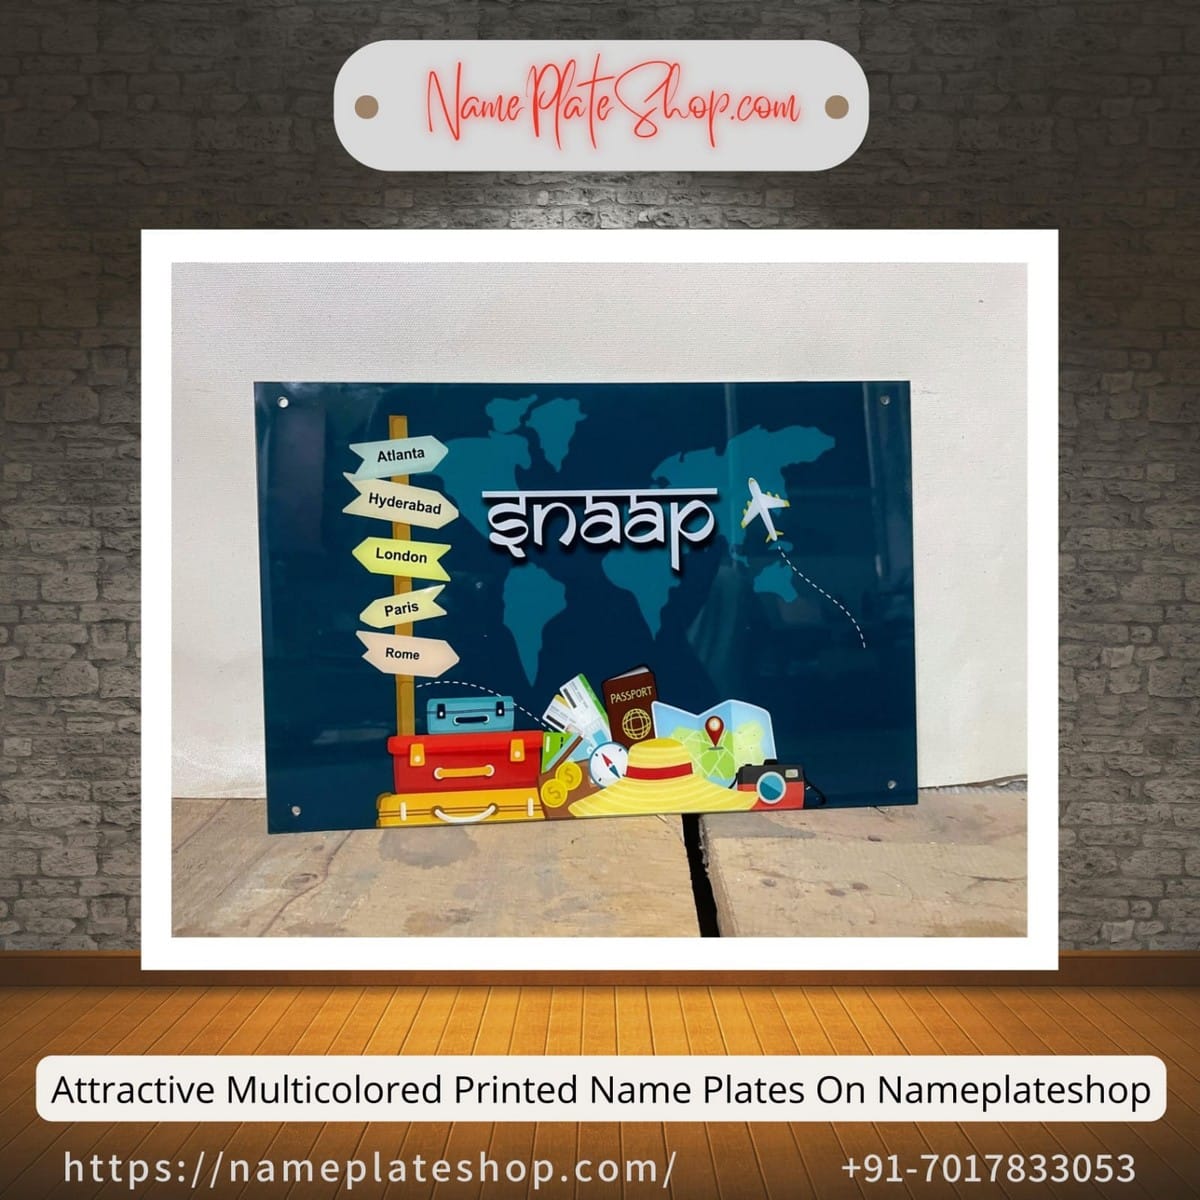 We Have Best Multicolored Printed Nameplate At NamePlateShop